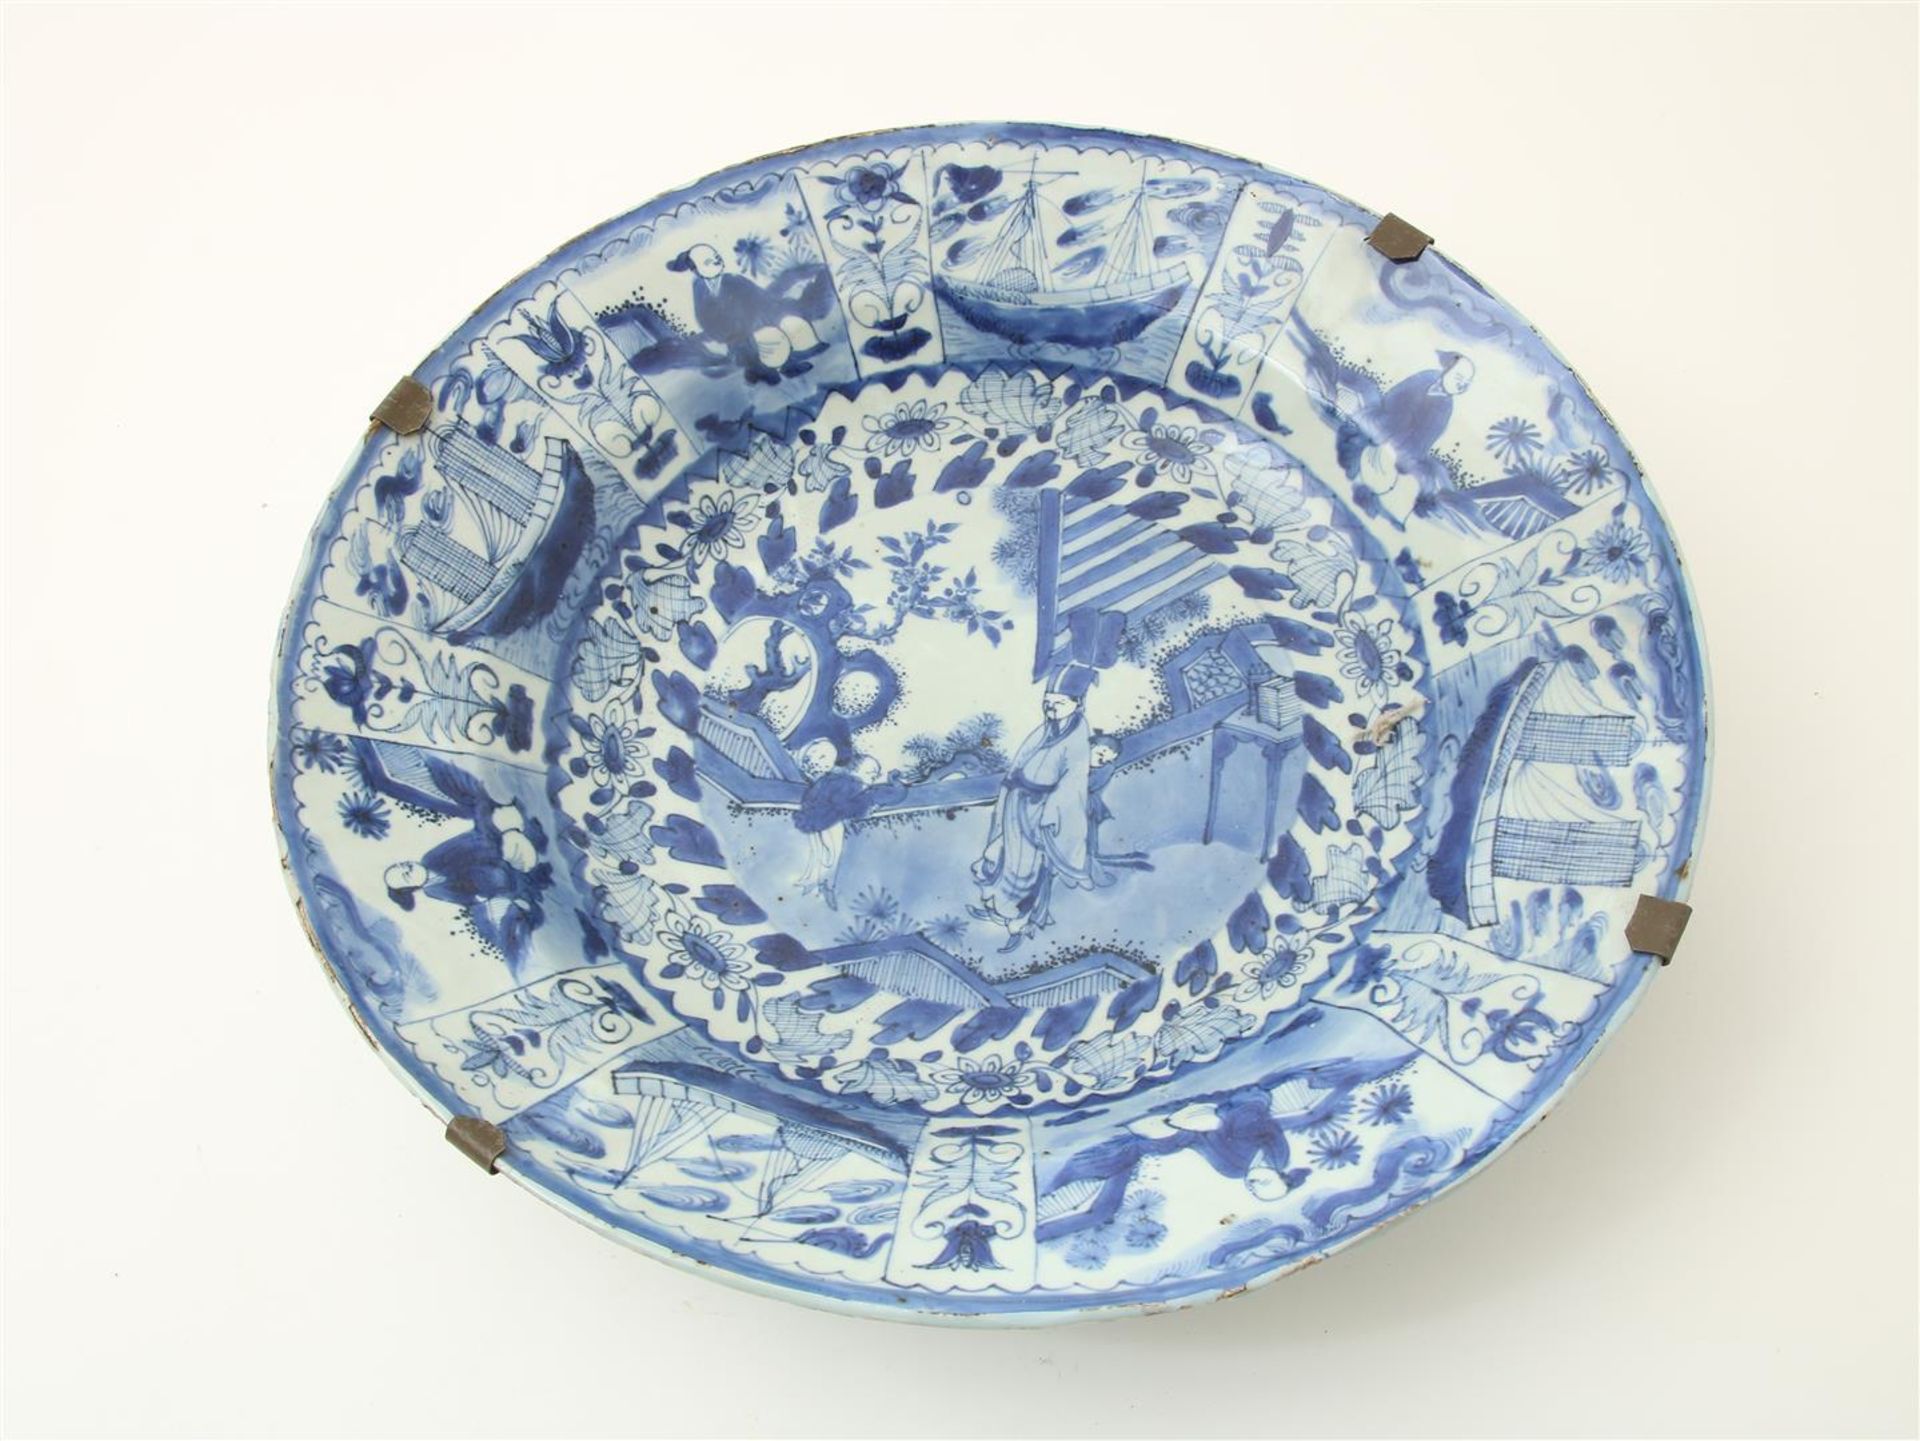 Porcelain dish with central decoration of Chinese people